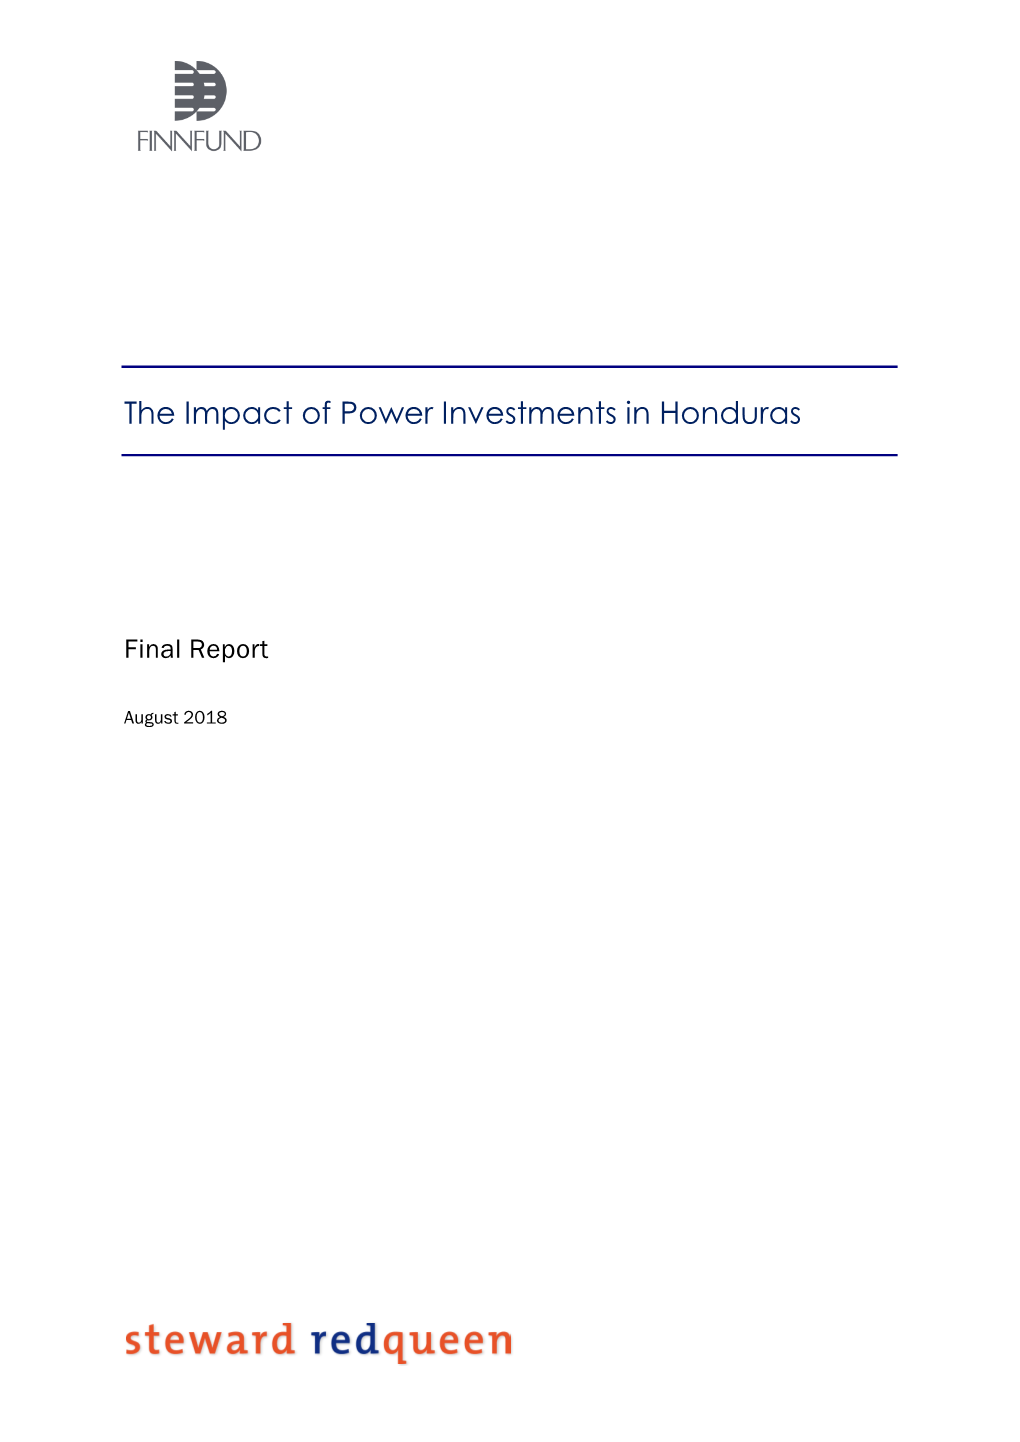 The Impact of Power Investments in Honduras